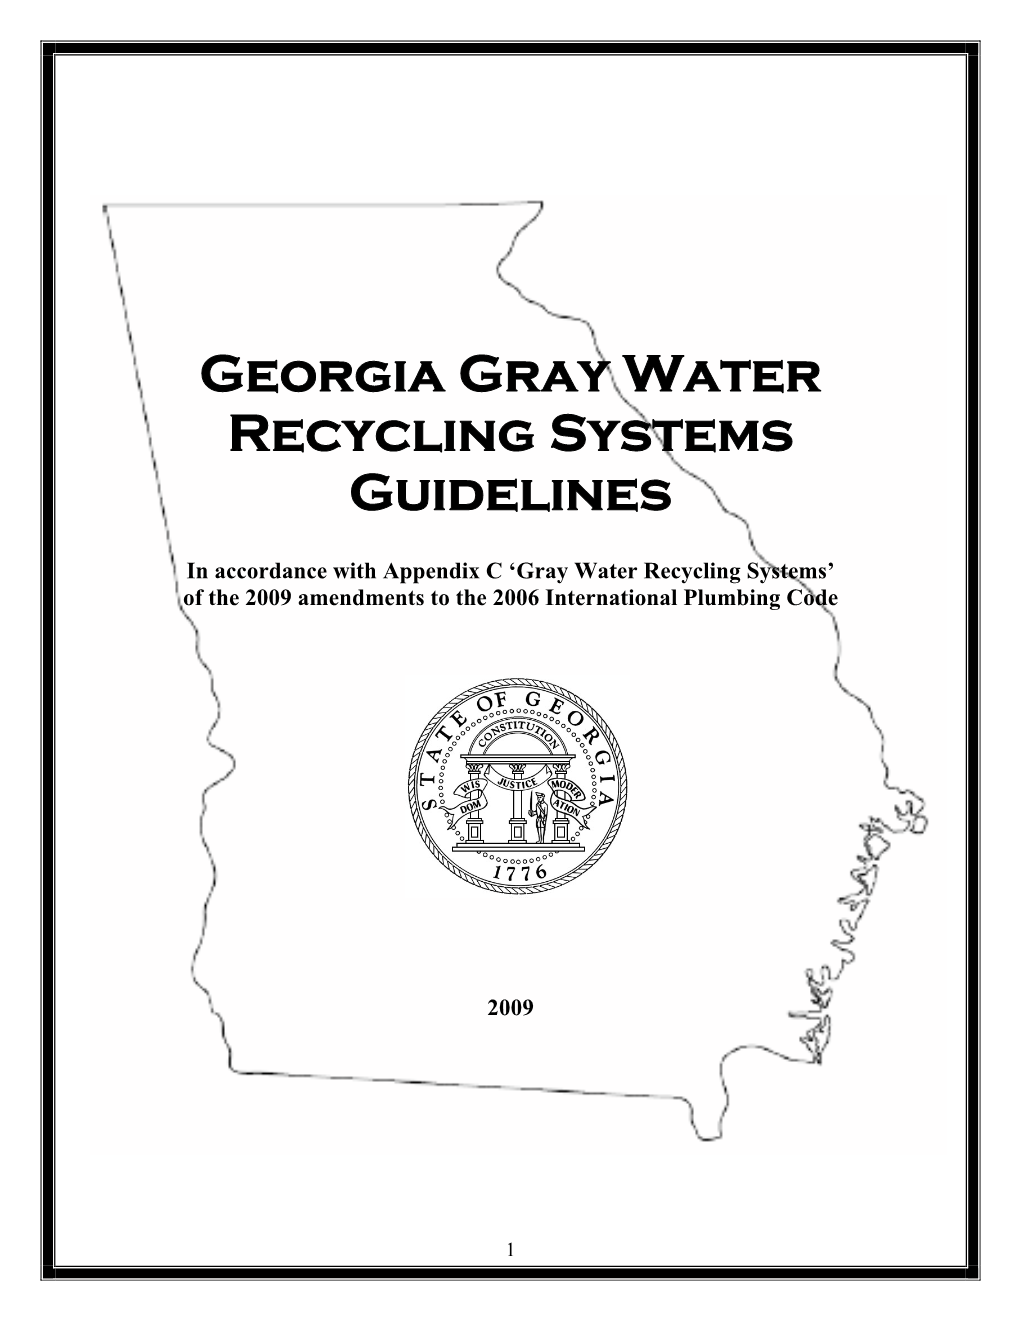 State of Georgia, Gray Water Recycling System Guidelines